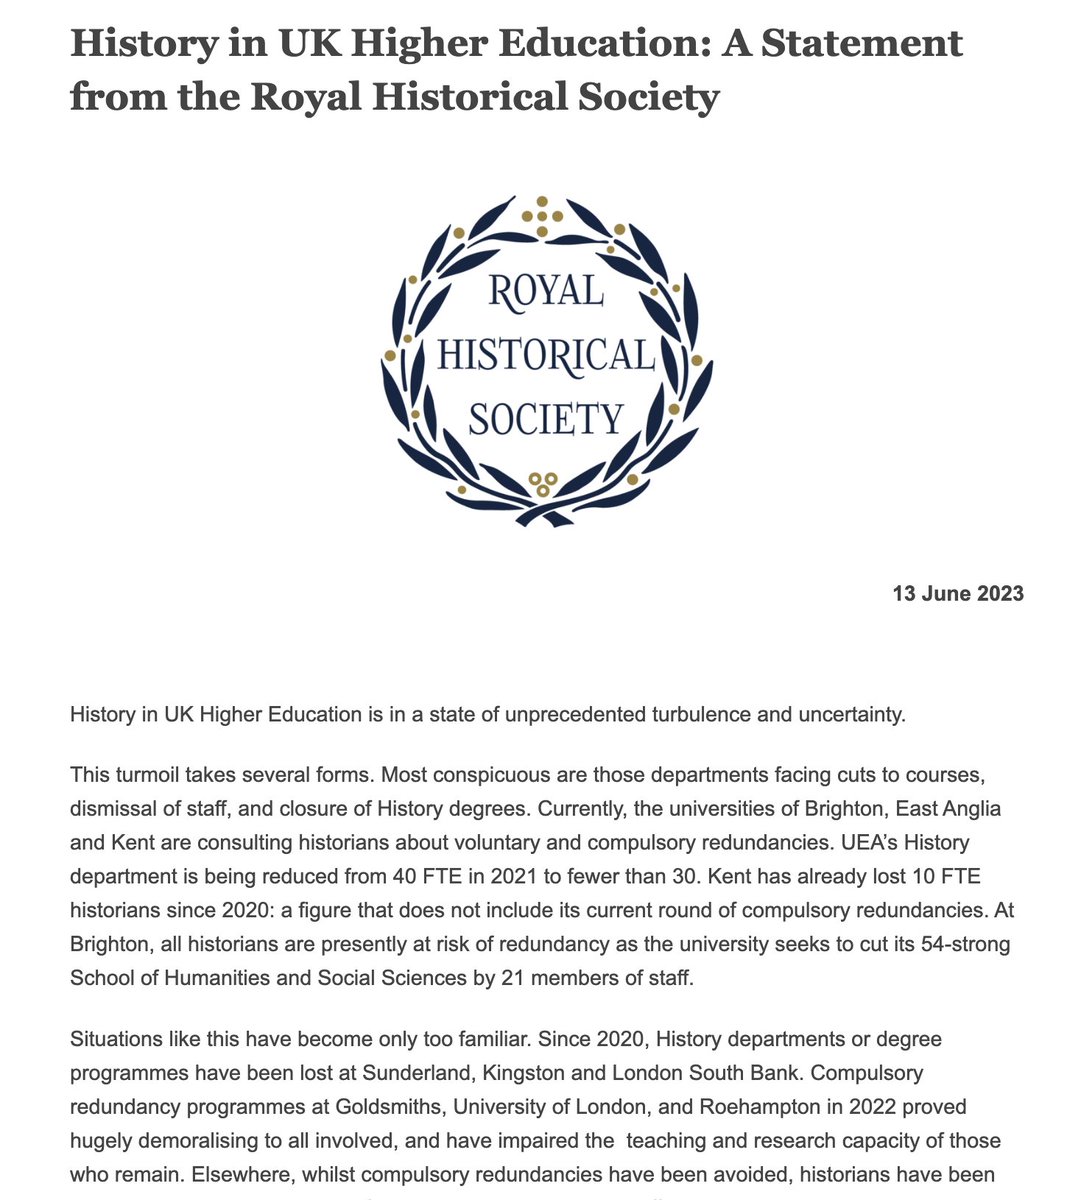 This morning @RoyalHistSoc issues 'History in UK Higher Education: A Statement from the Royal Historical Society' bit.ly/3qGTF2J The statement addresses the extent, consequences and causes of ongoing cuts and closures at UK #History departments. #twitterstorians